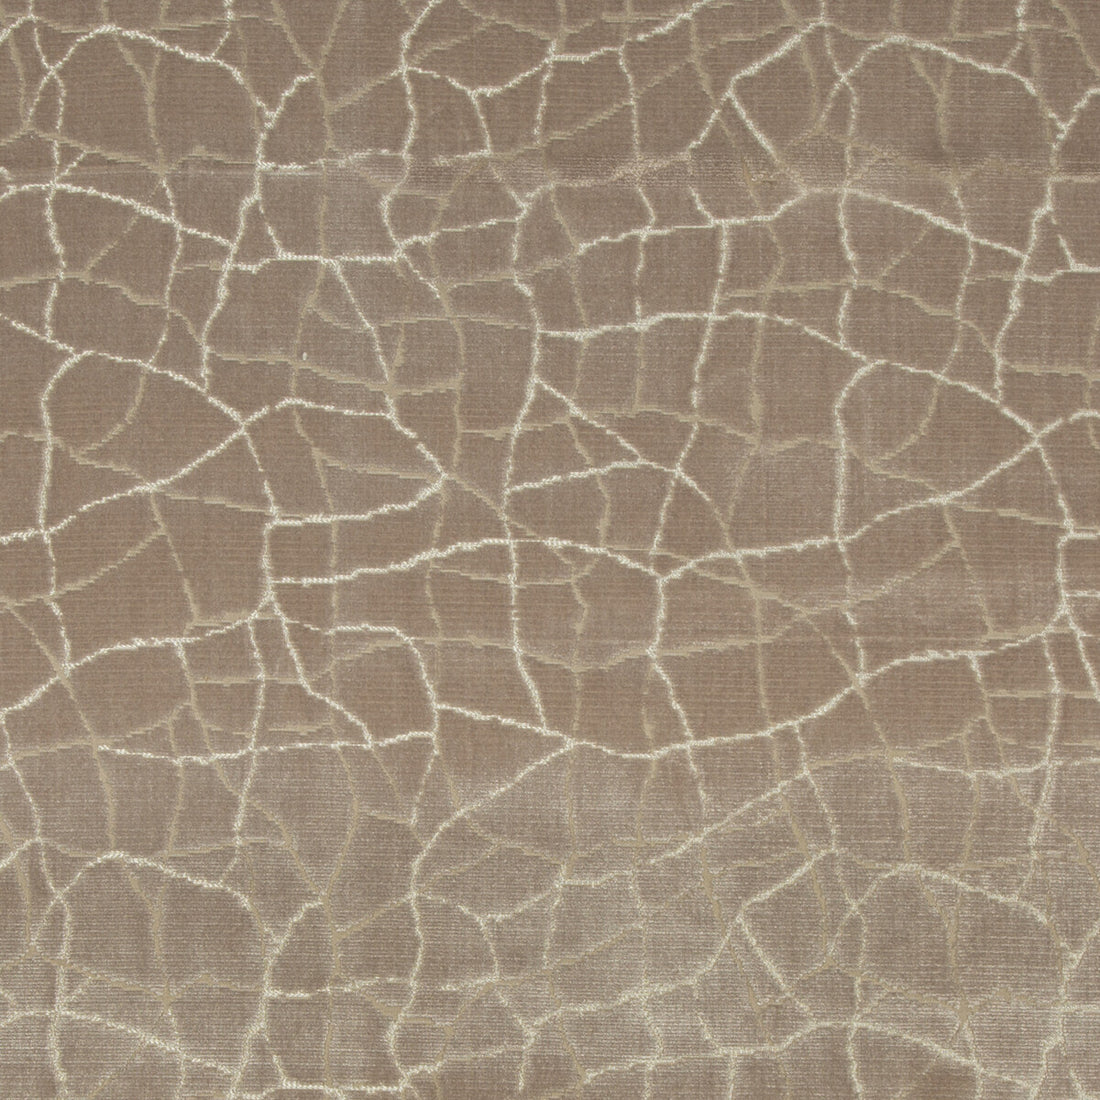 Formation fabric in fawn color - pattern 34780.106.0 - by Kravet Couture in the Artisan Velvets collection